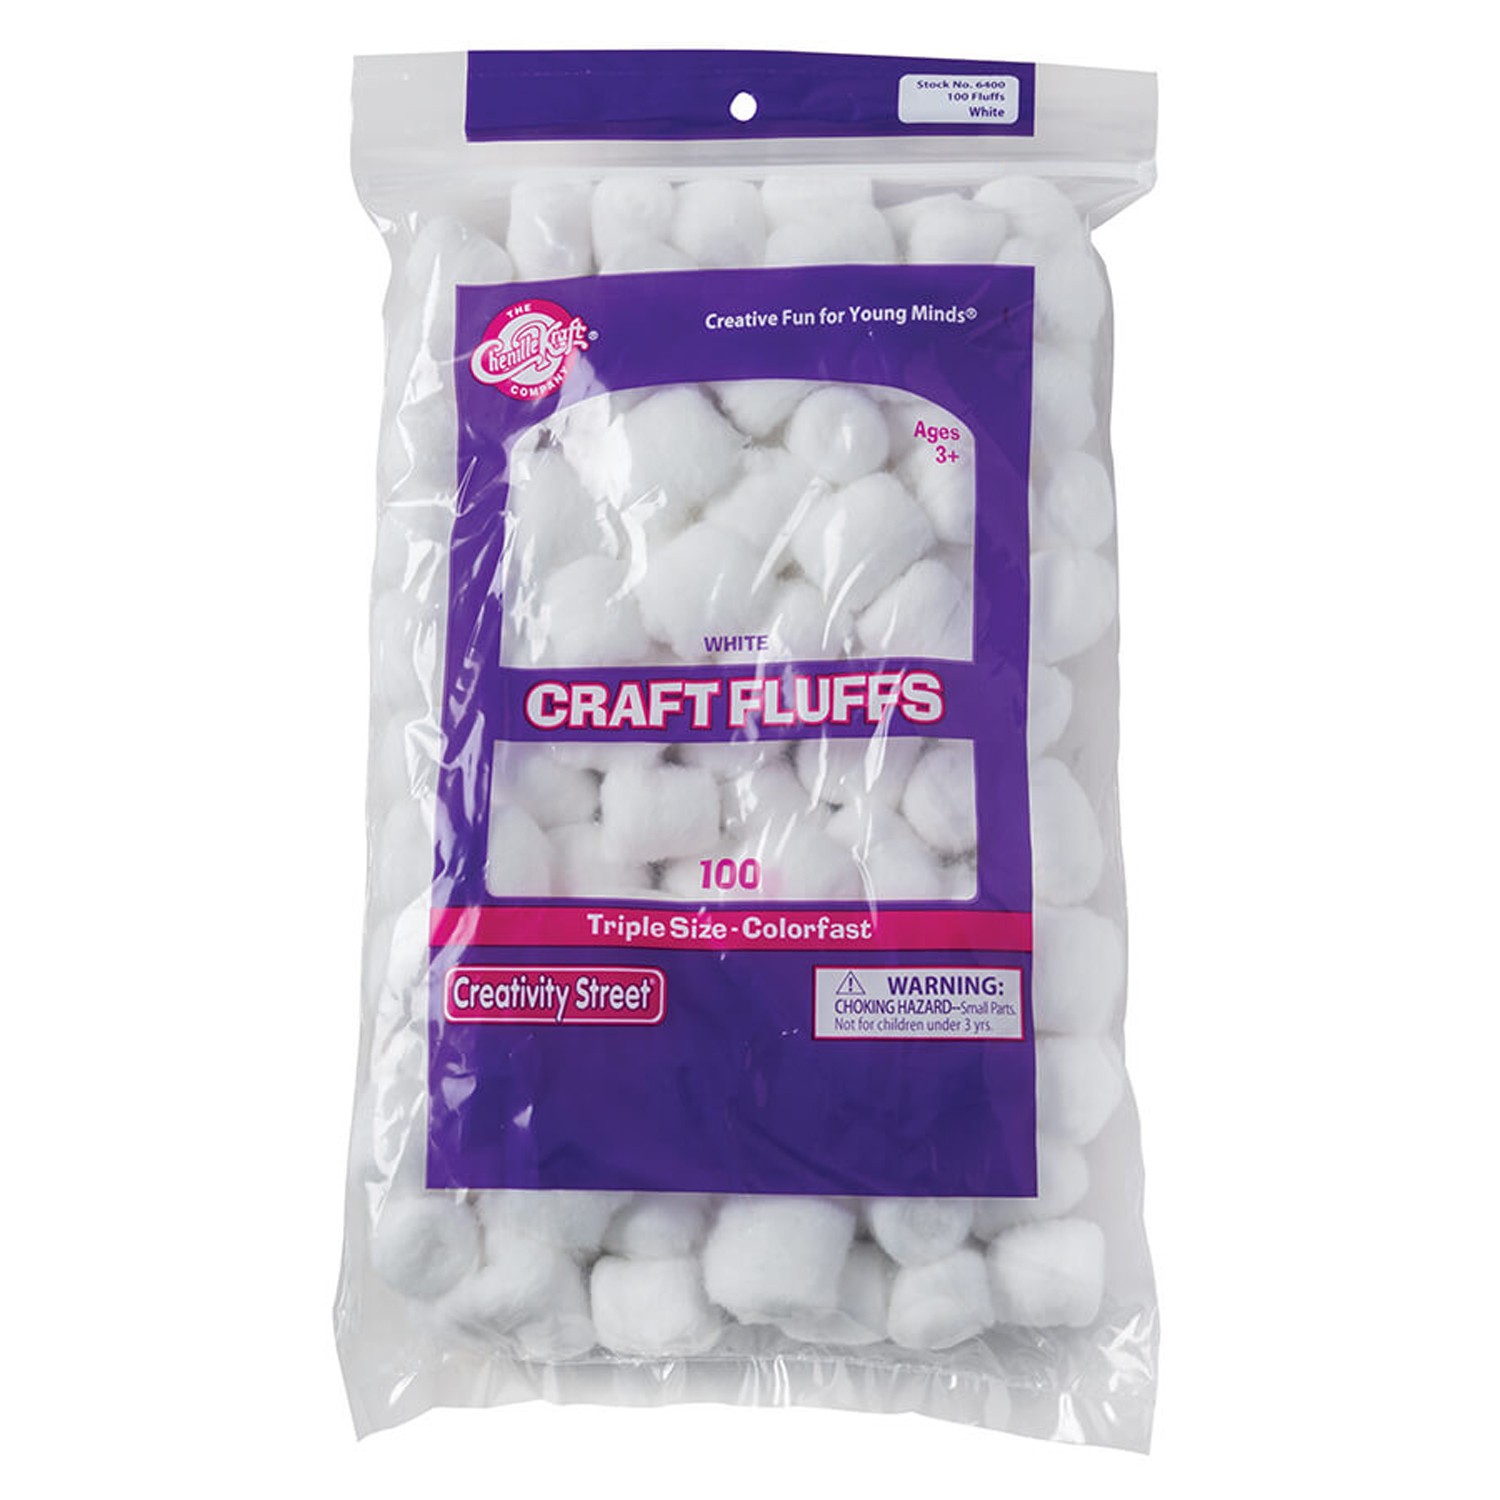 Triple Size Craft Fluffs, White, Approx. 1", 100 Pieces